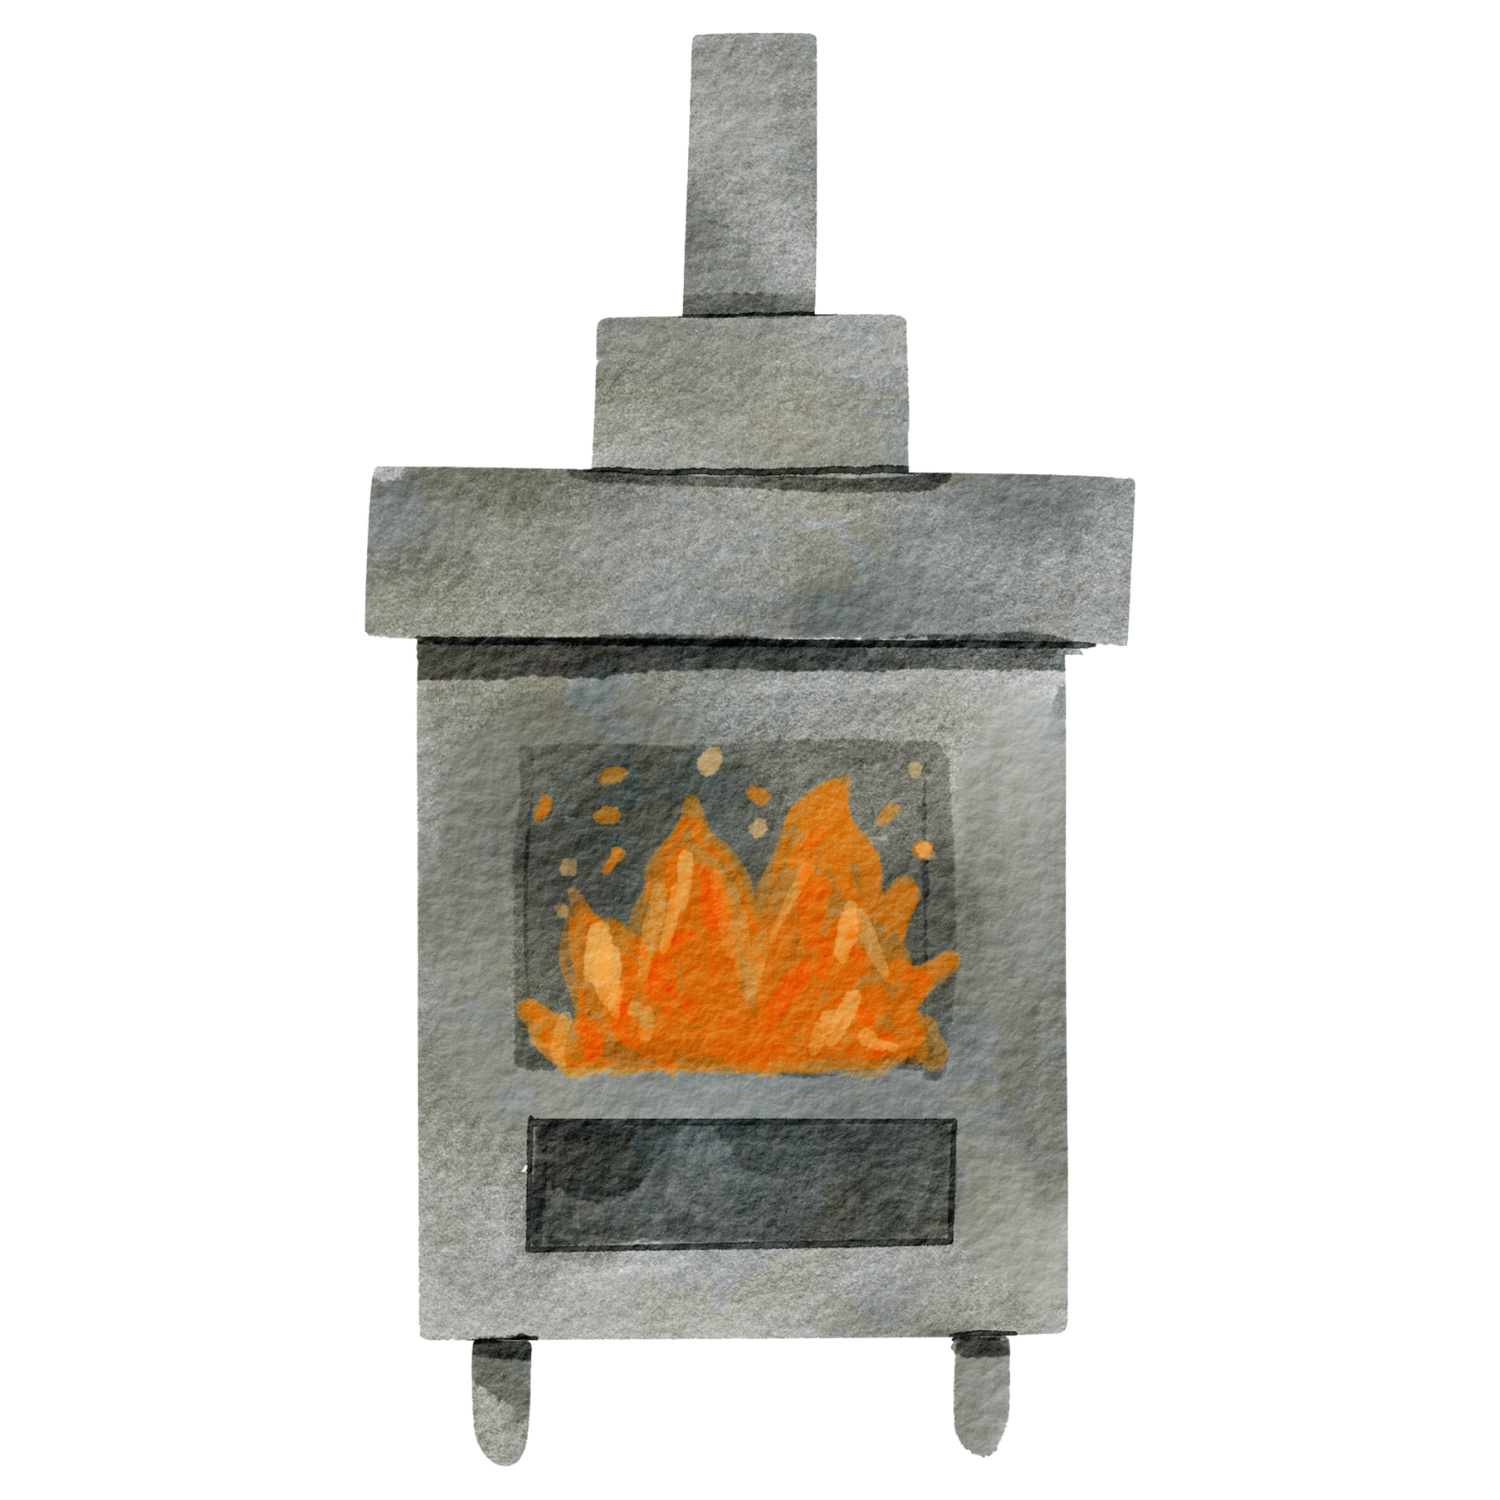 watercolour illustration of wood stove